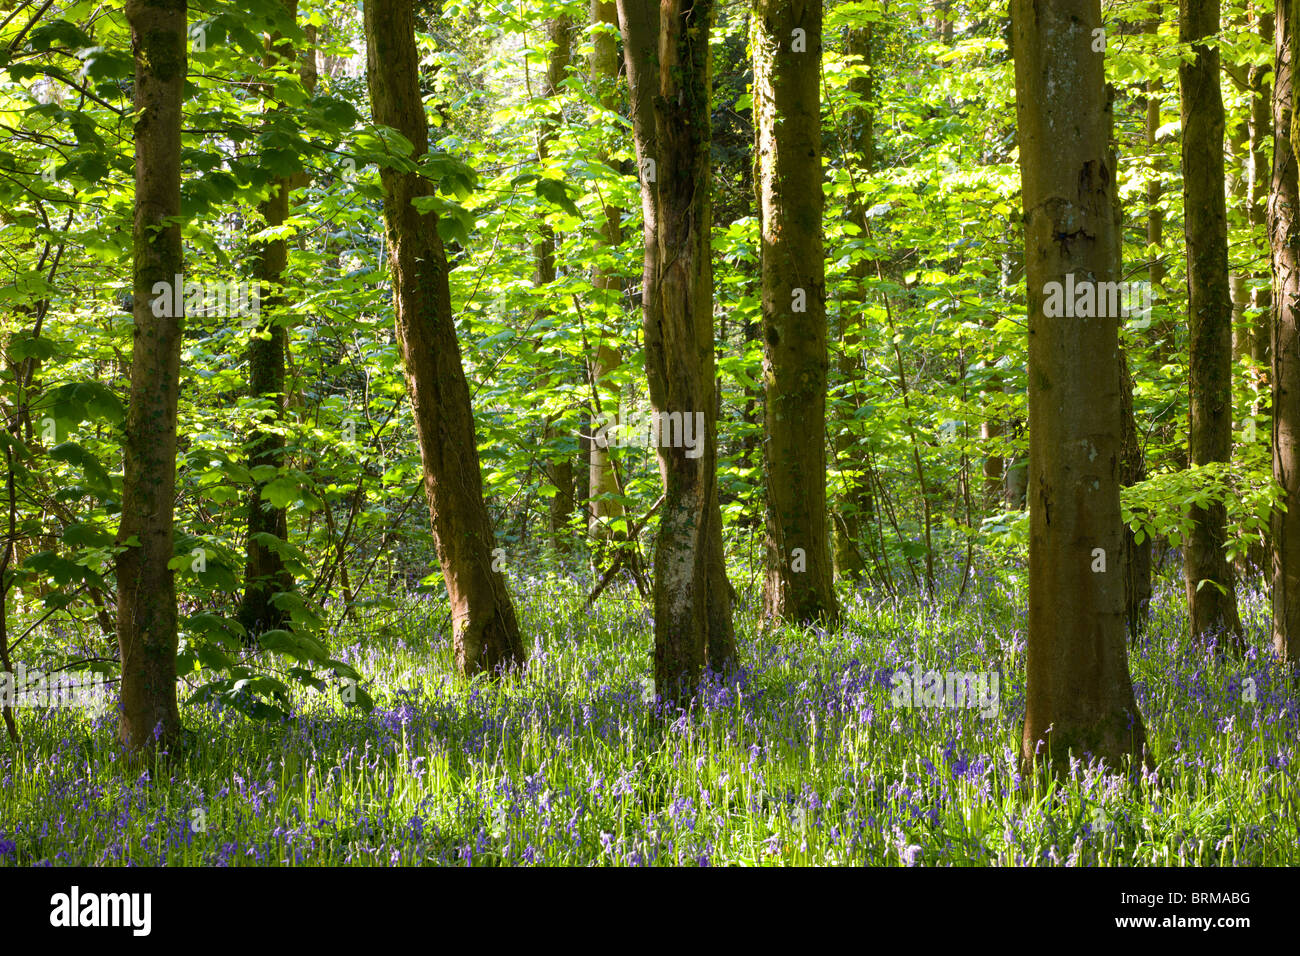 Common Bluebells (Hyacinthoides non-scripta) growing in Coed Cefn woodland near Crickhowell, Brecon Beacons National Park, Powys Stock Photo